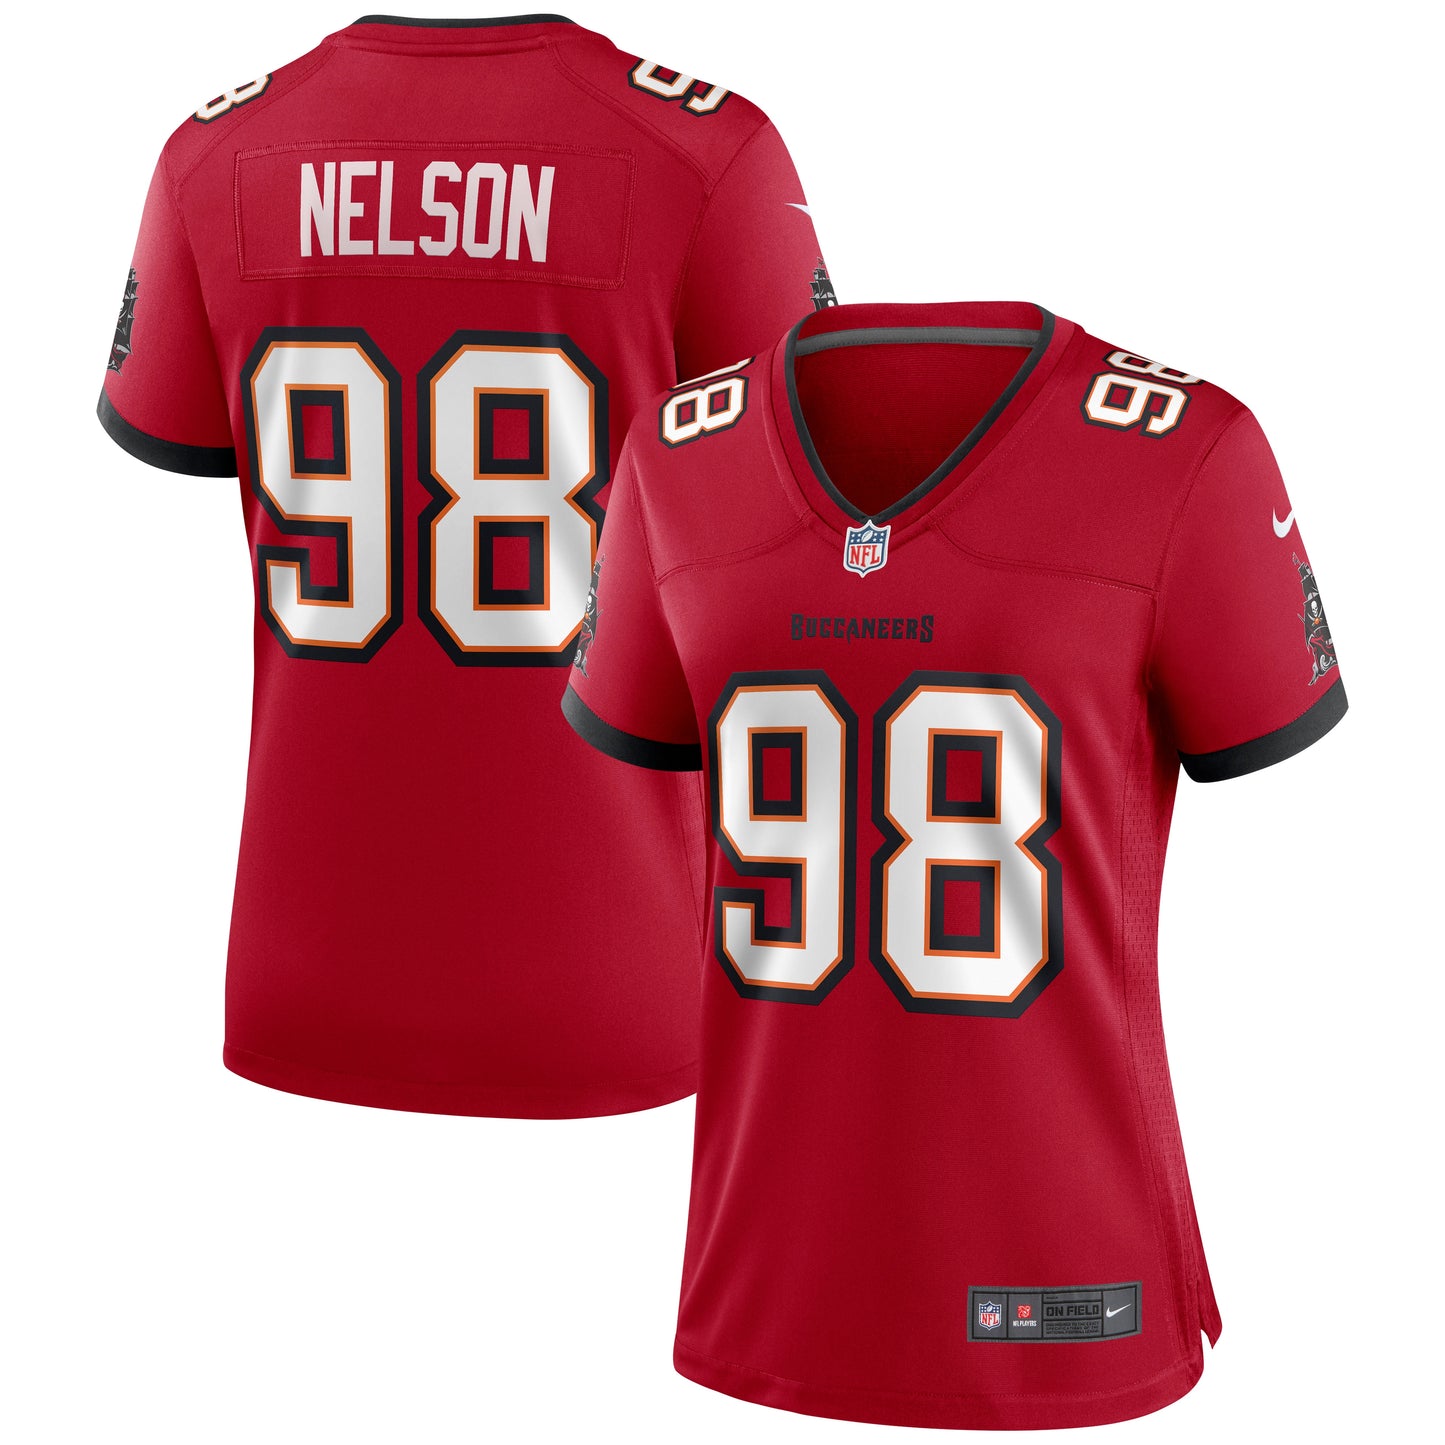 Anthony Nelson Tampa Bay Buccaneers Nike Women's Game Jersey - Red